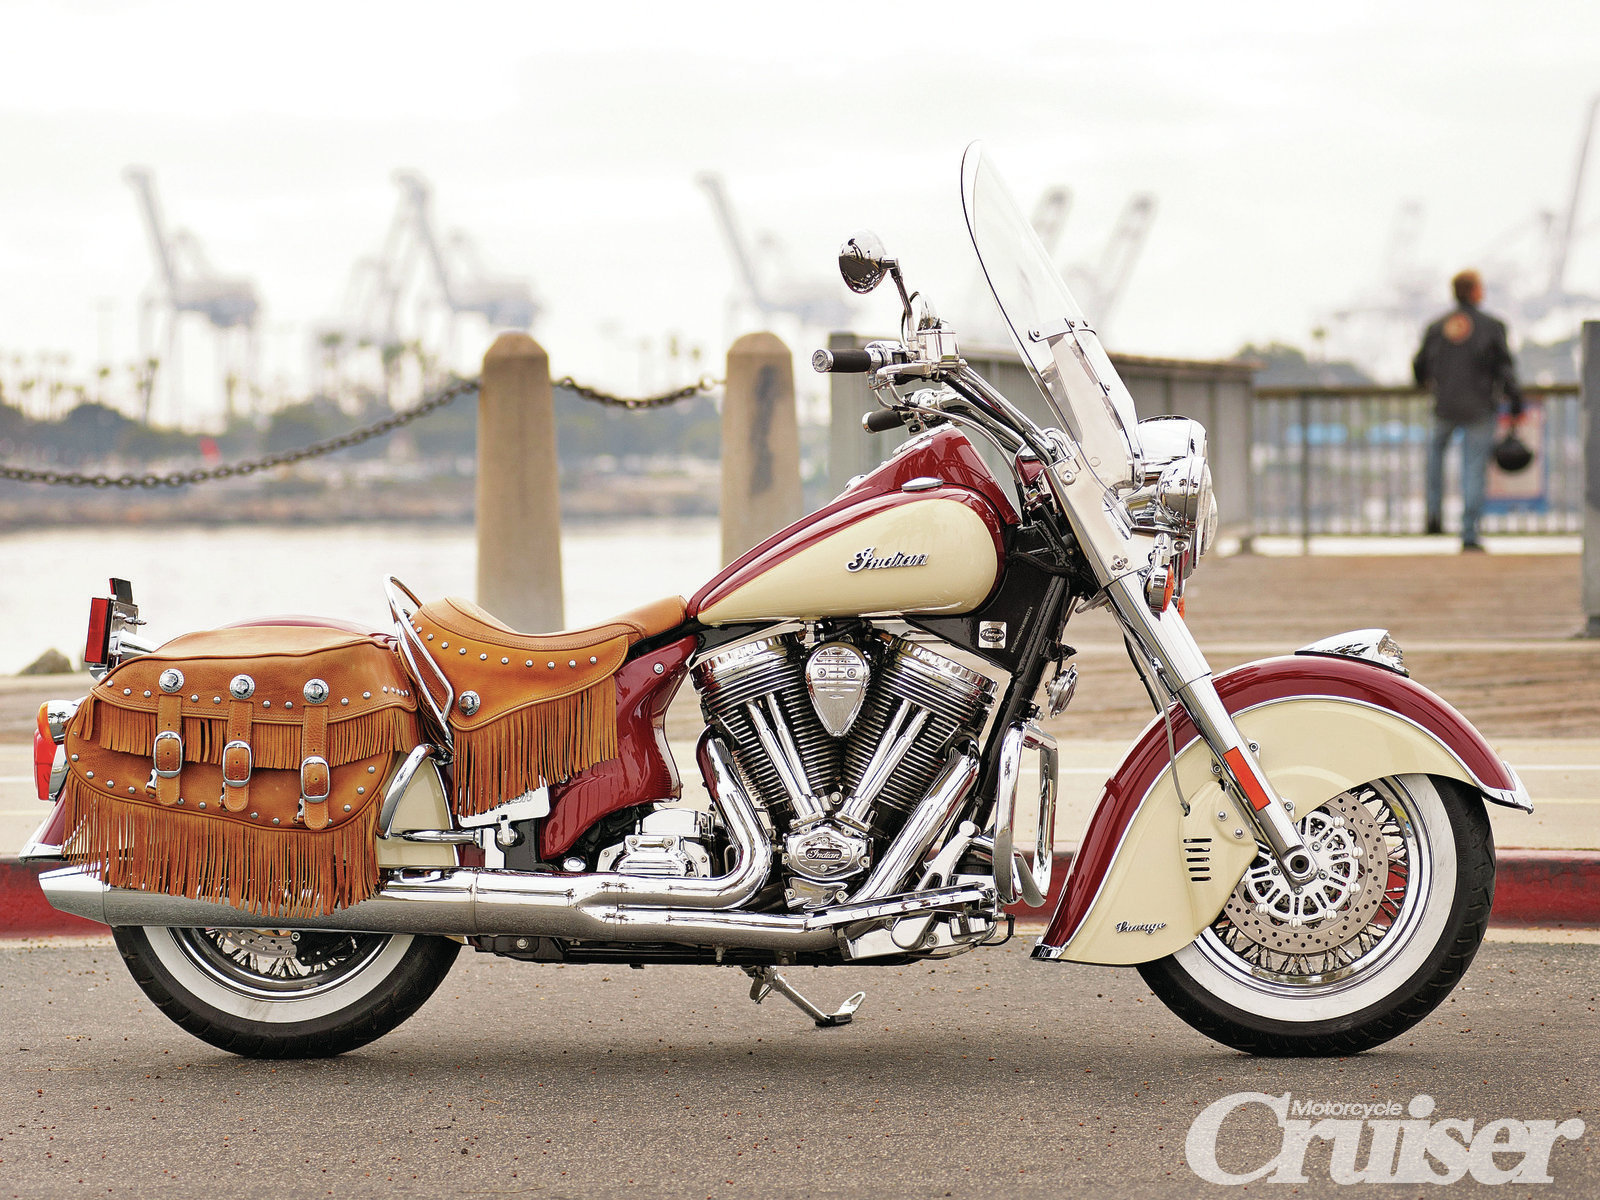 2012 Indian Chief Vintage Vs 2012 Harley Davidson Softail Deluxe Motorcycle Cruiser